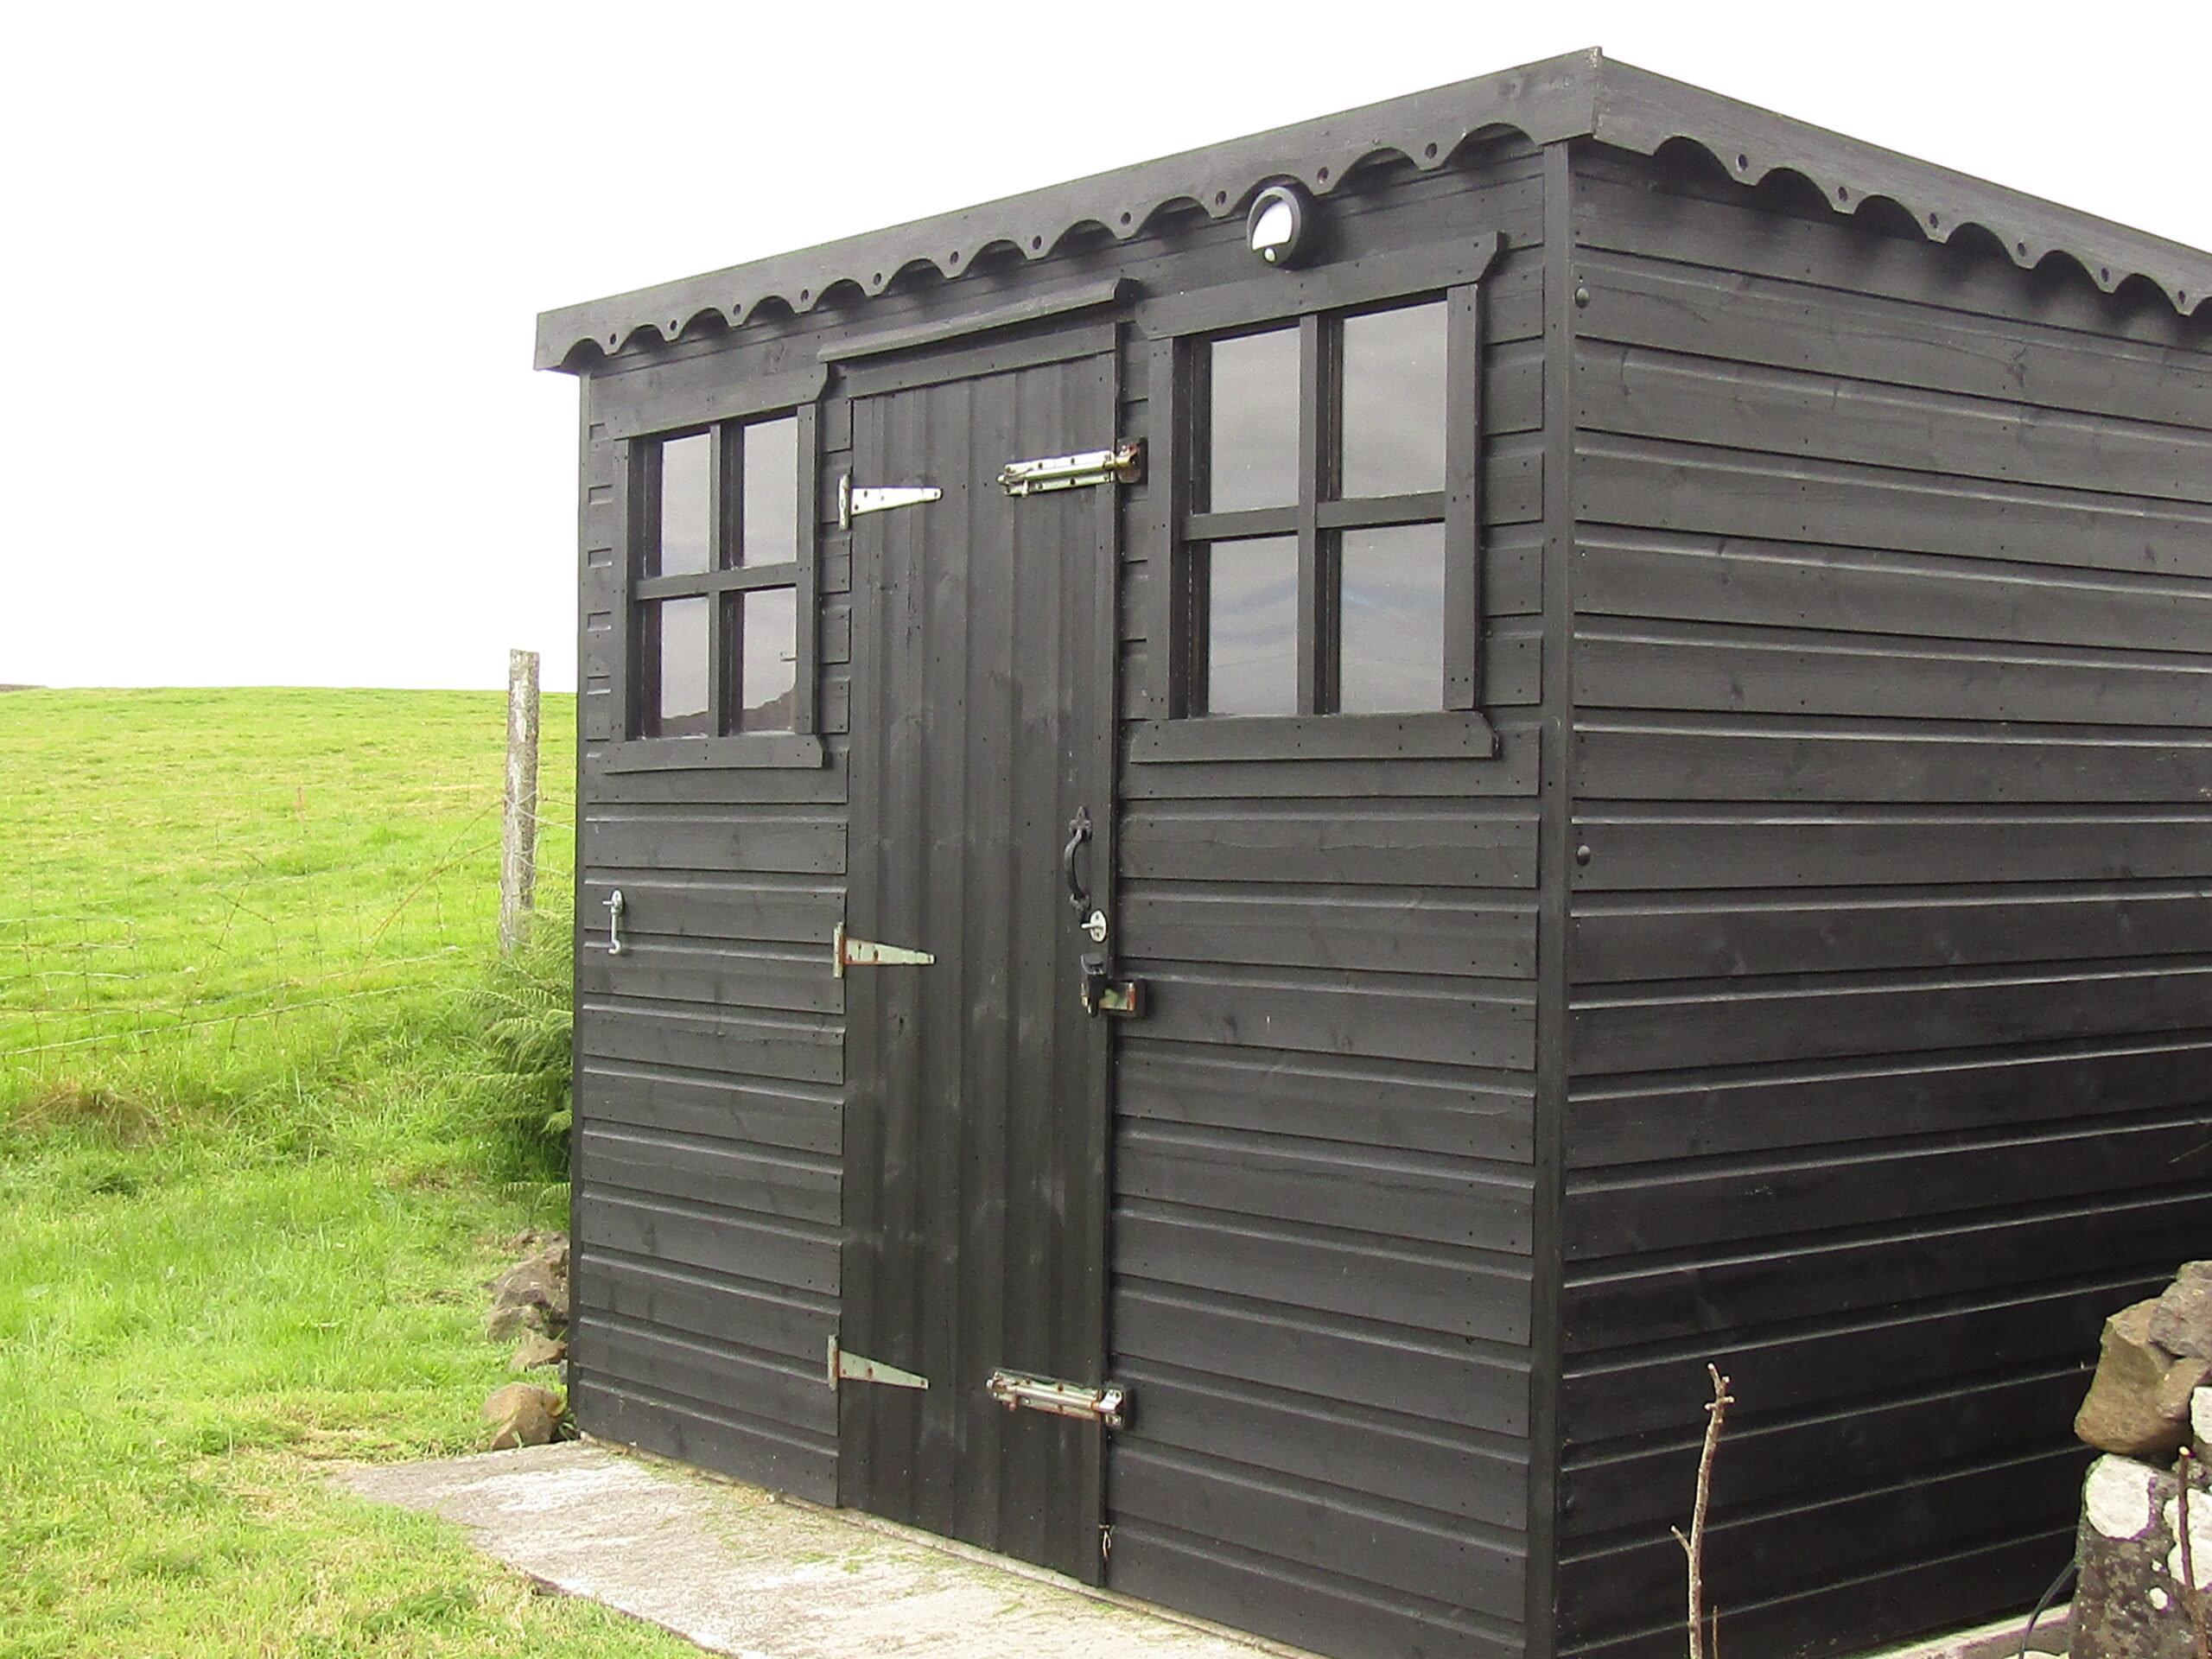 shared shed for the pods